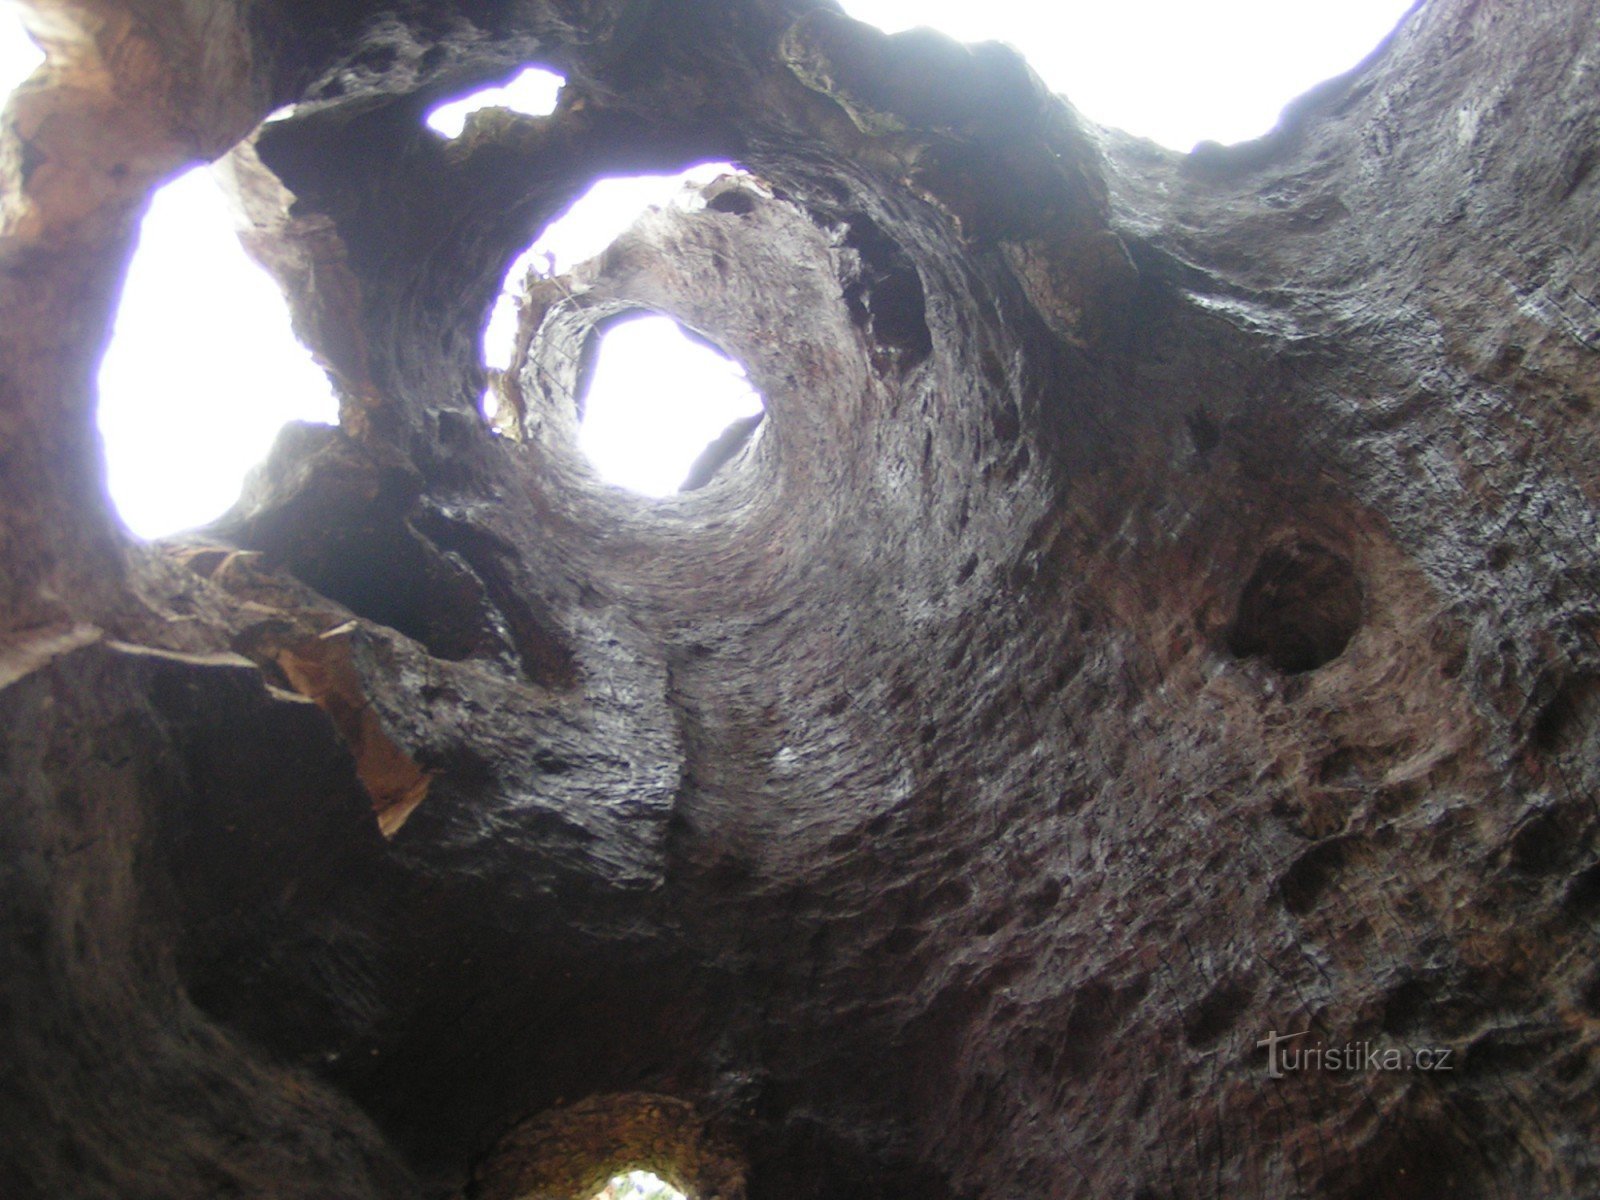 View through the hollow trunk of a maple tree